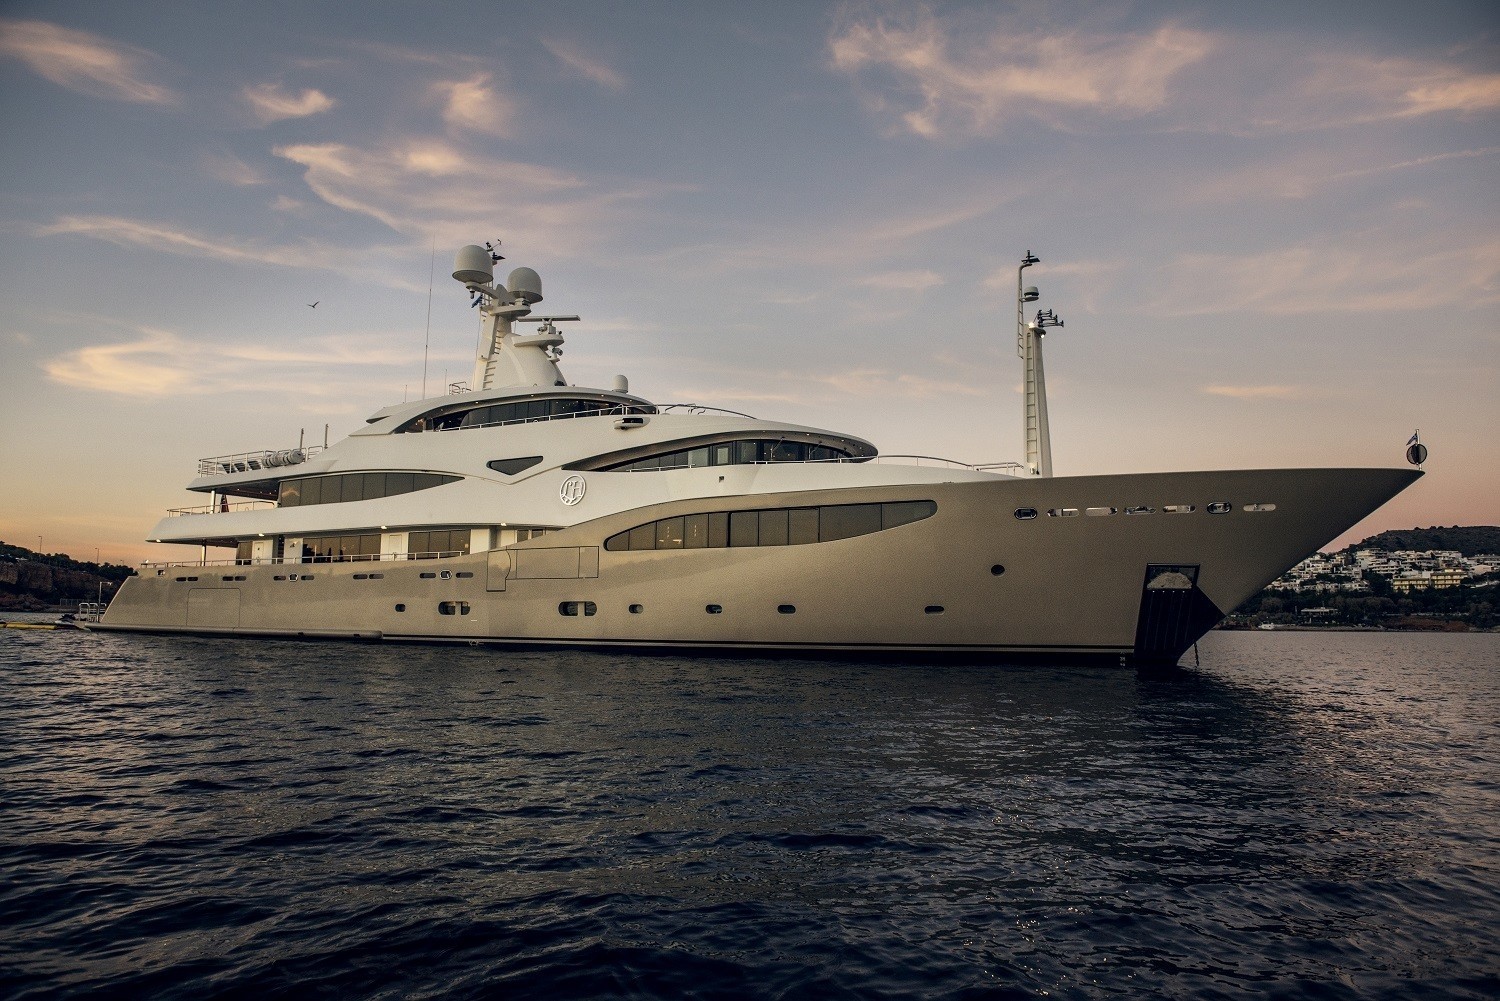 The 60m Yacht by CRN